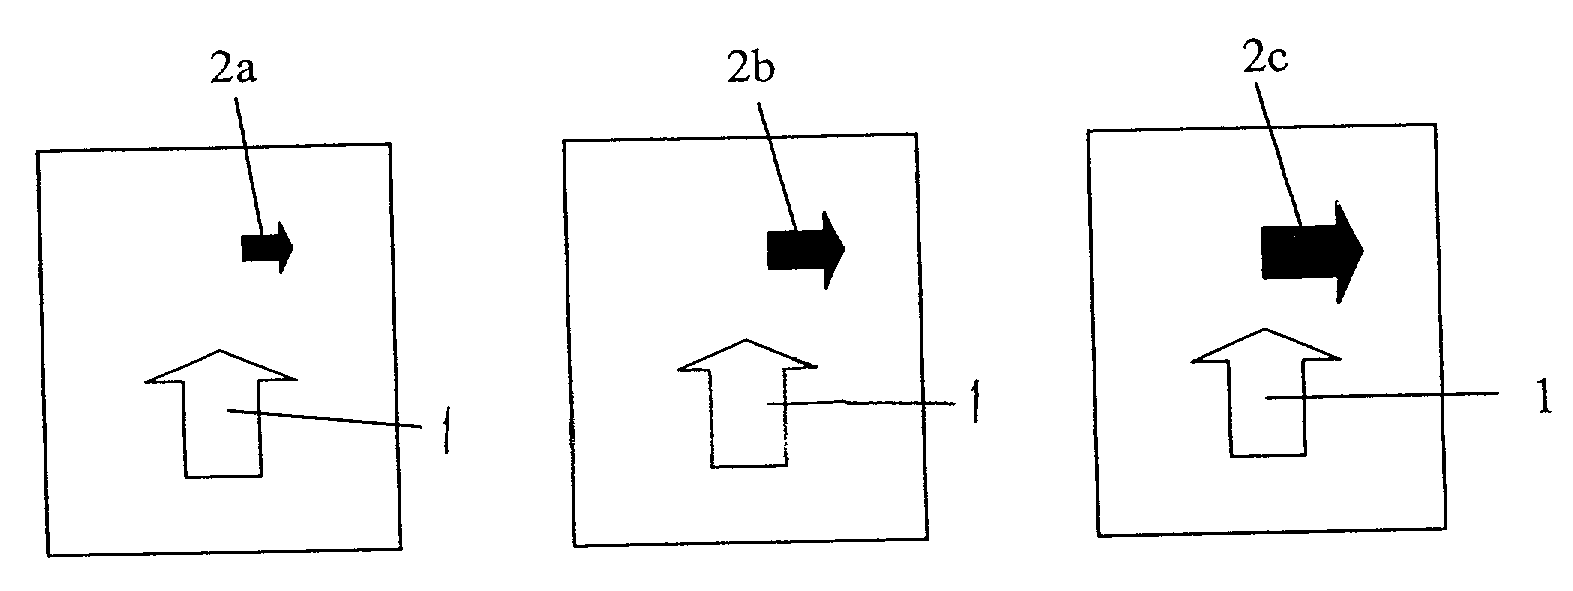 Routing display for navigation systems